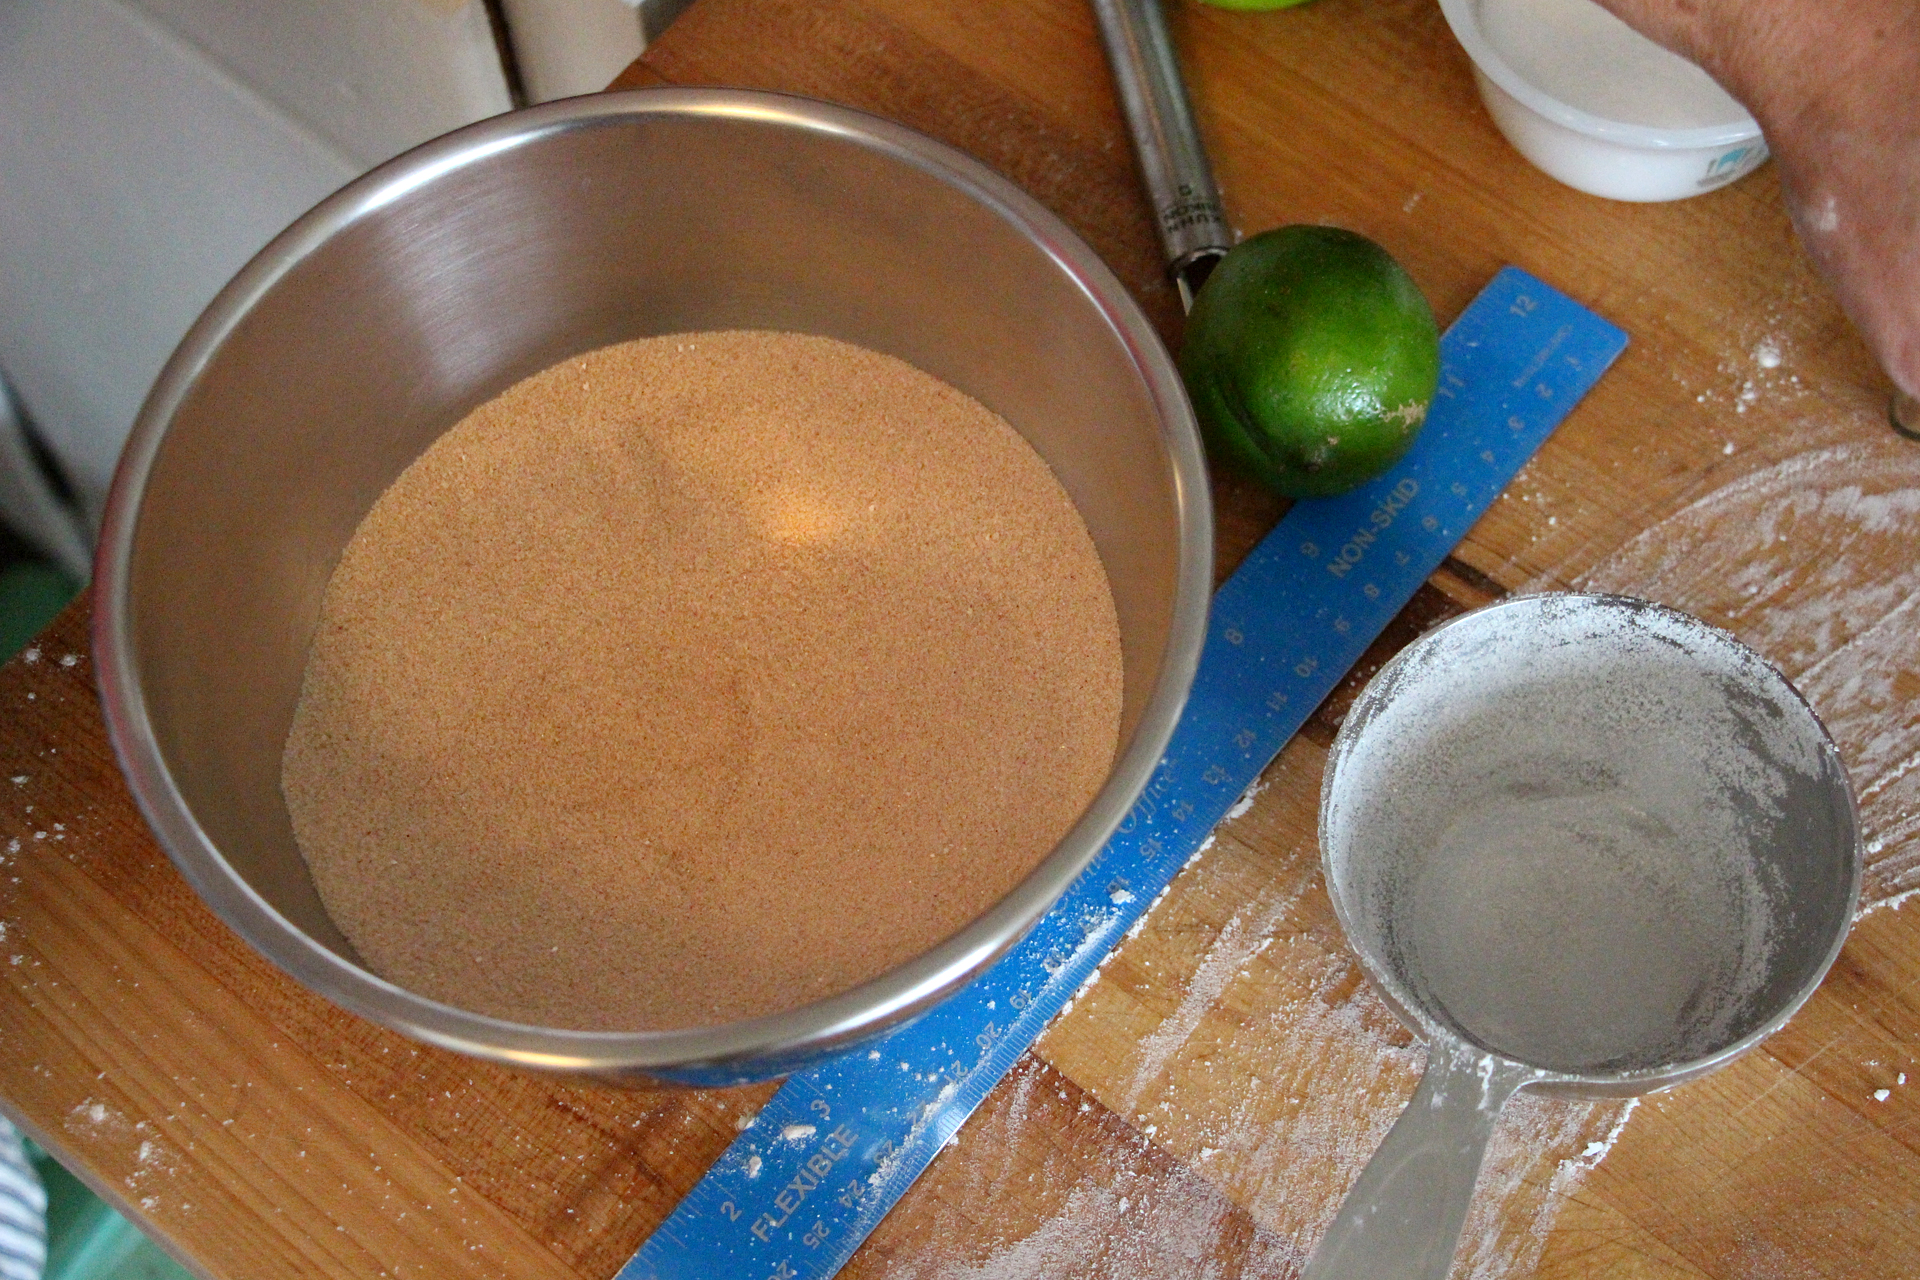 n a large bowl, whisk together the sugar and cinnamon. Set aside.